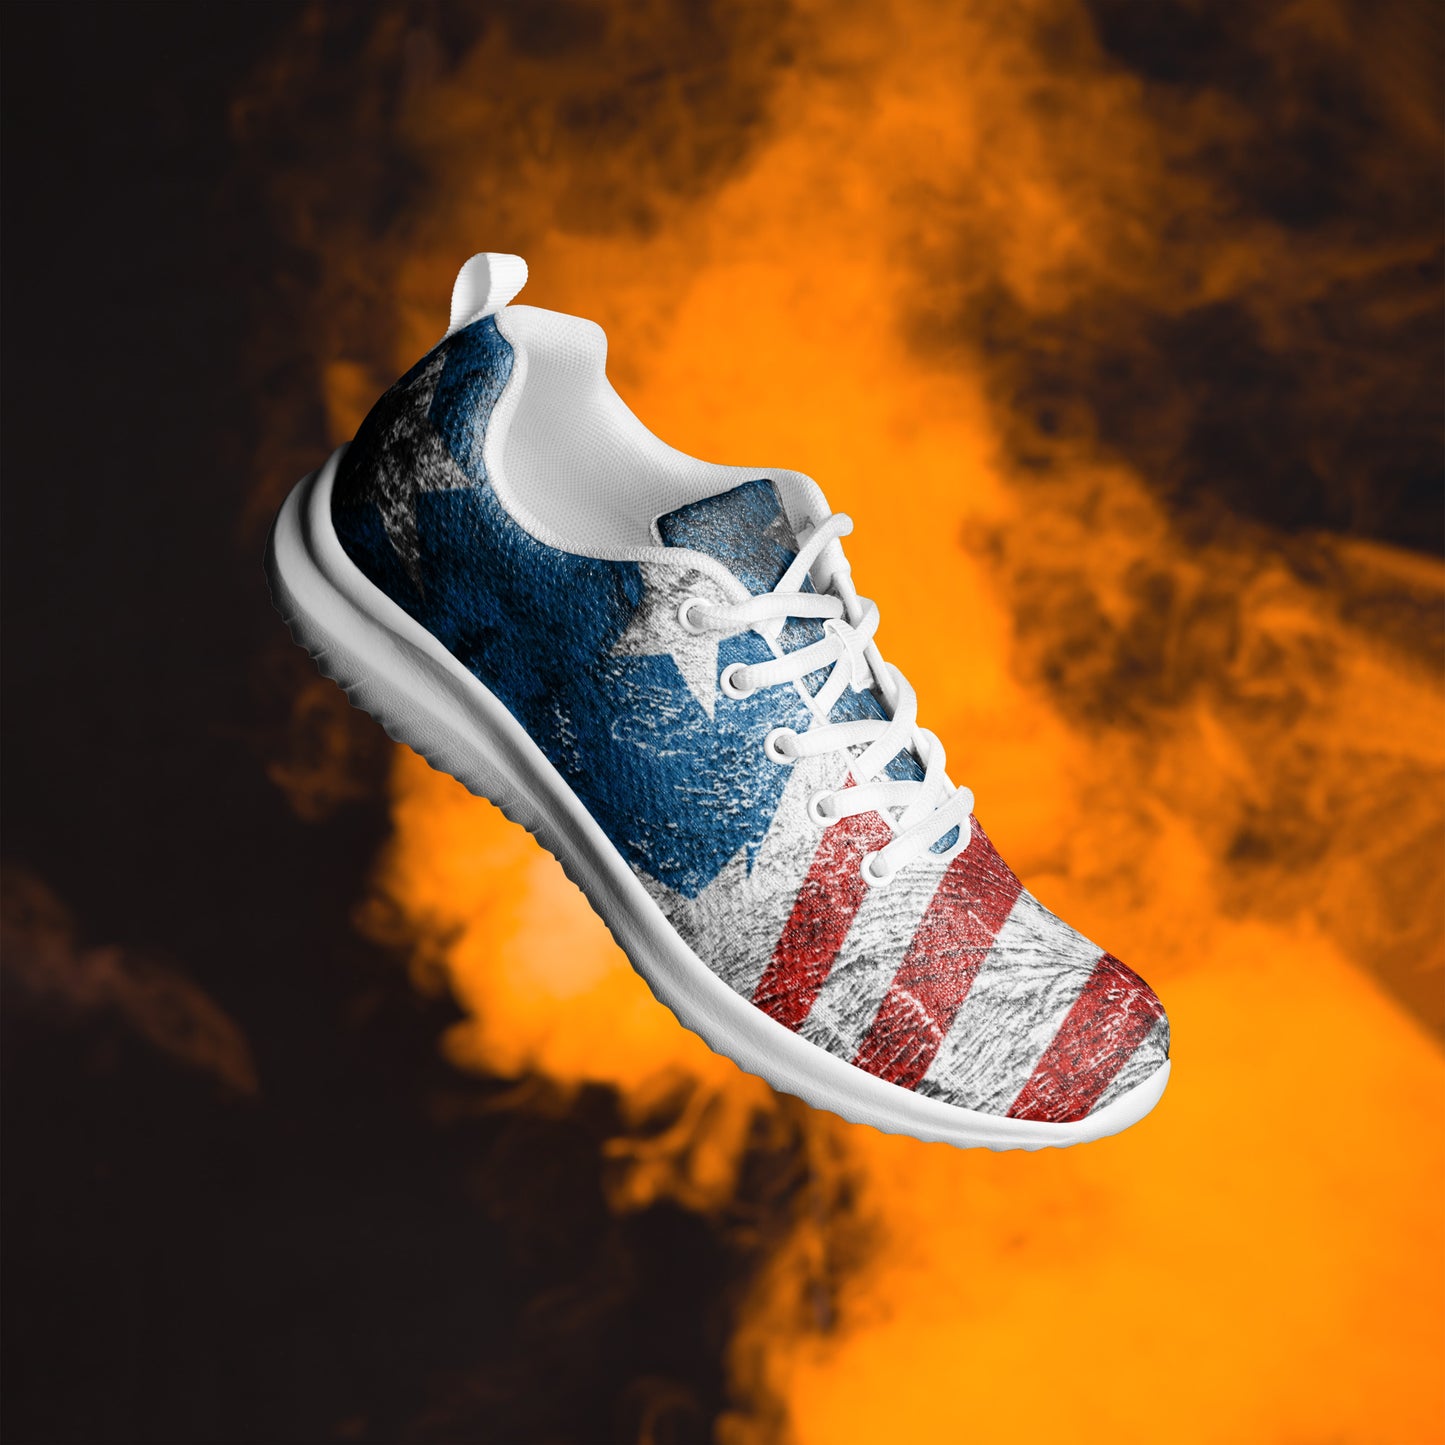 USA Classic Flag Women’s athletic shoes